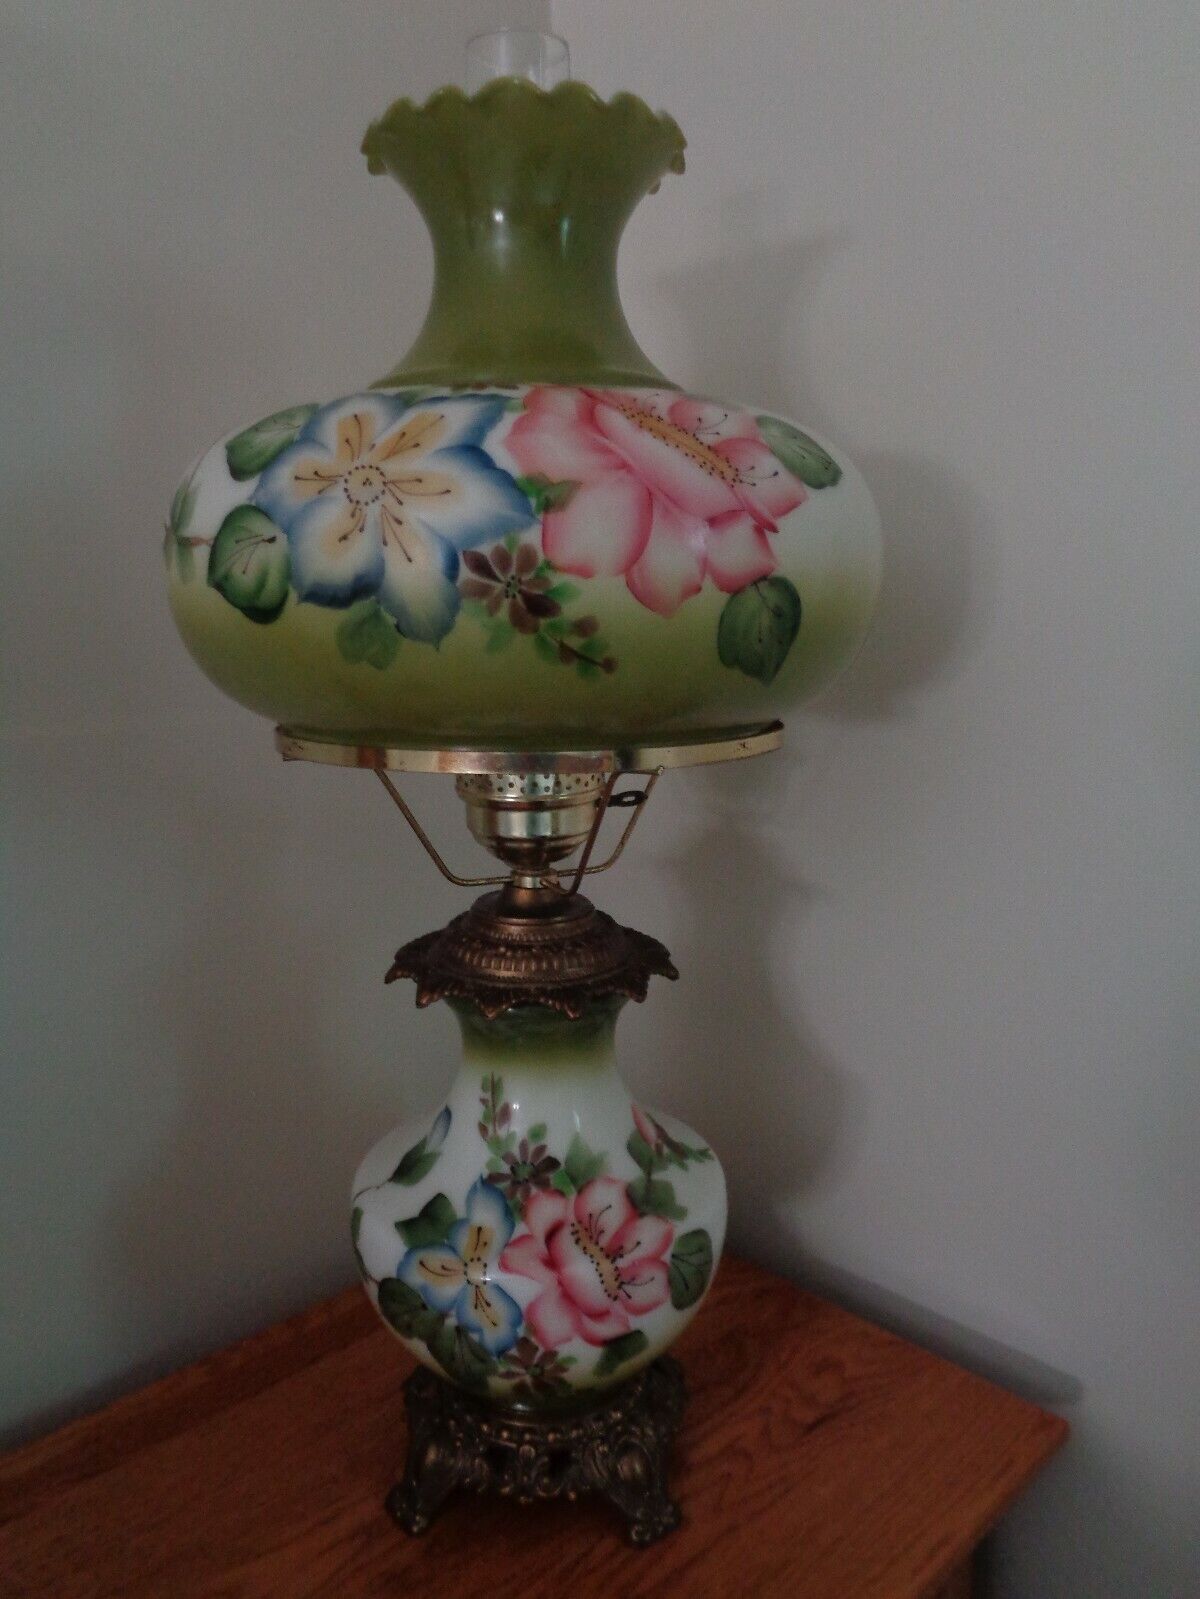  ANTIQUE HURRICANE Table LAMPS RARE~ handpainted  X-TRA LARGE GREAT GIFTS GWTW